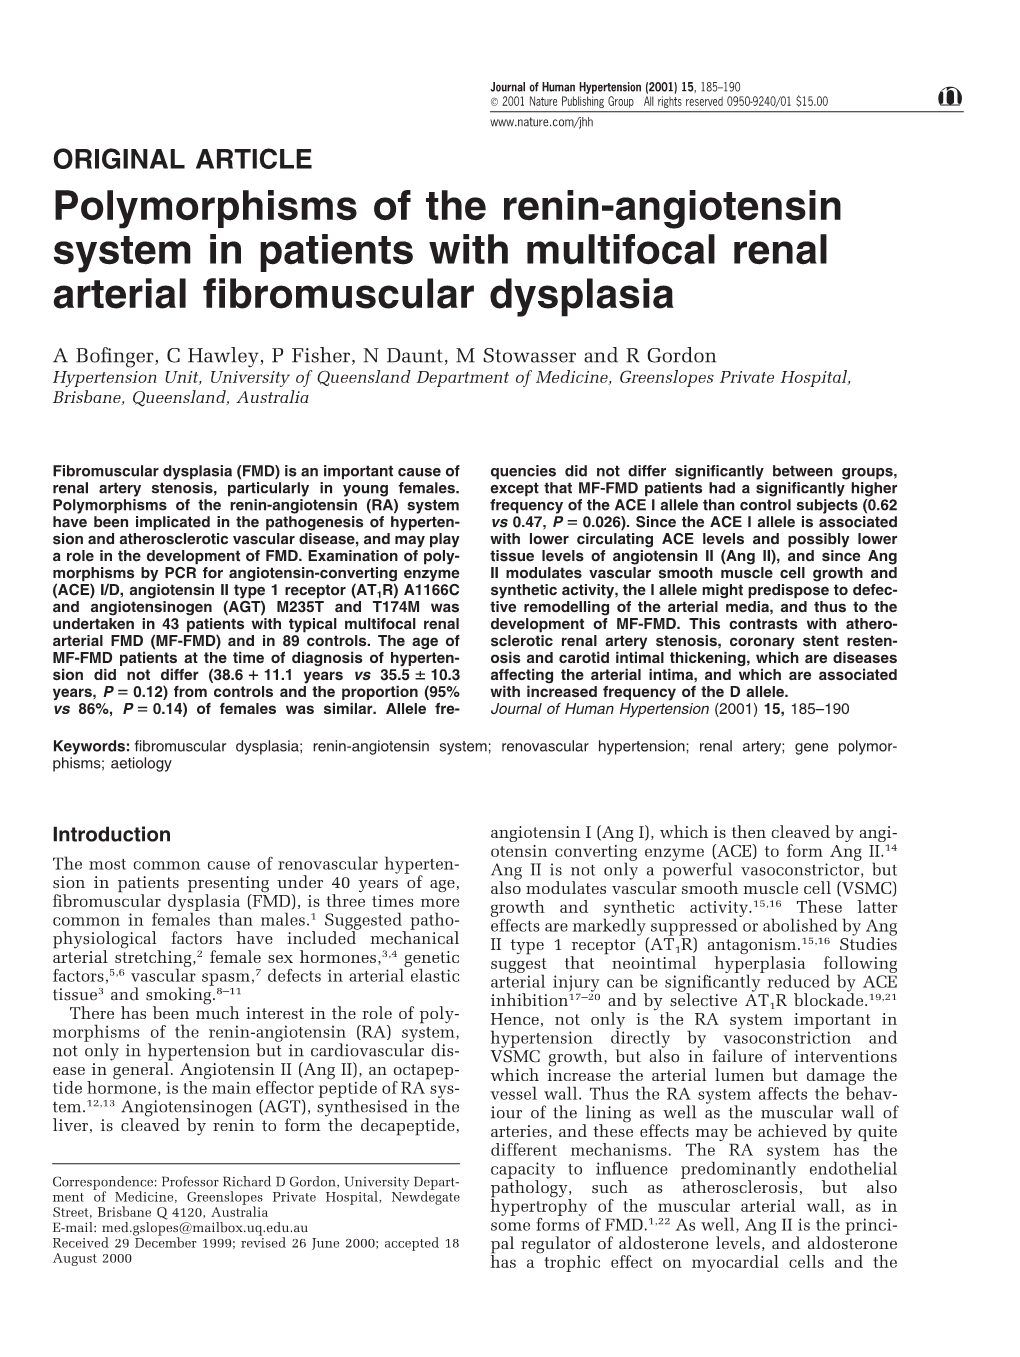 Polymorphisms of the Renin-Angiotensin System in Patients with Multifocal Renal Arterial ﬁbromuscular Dysplasia